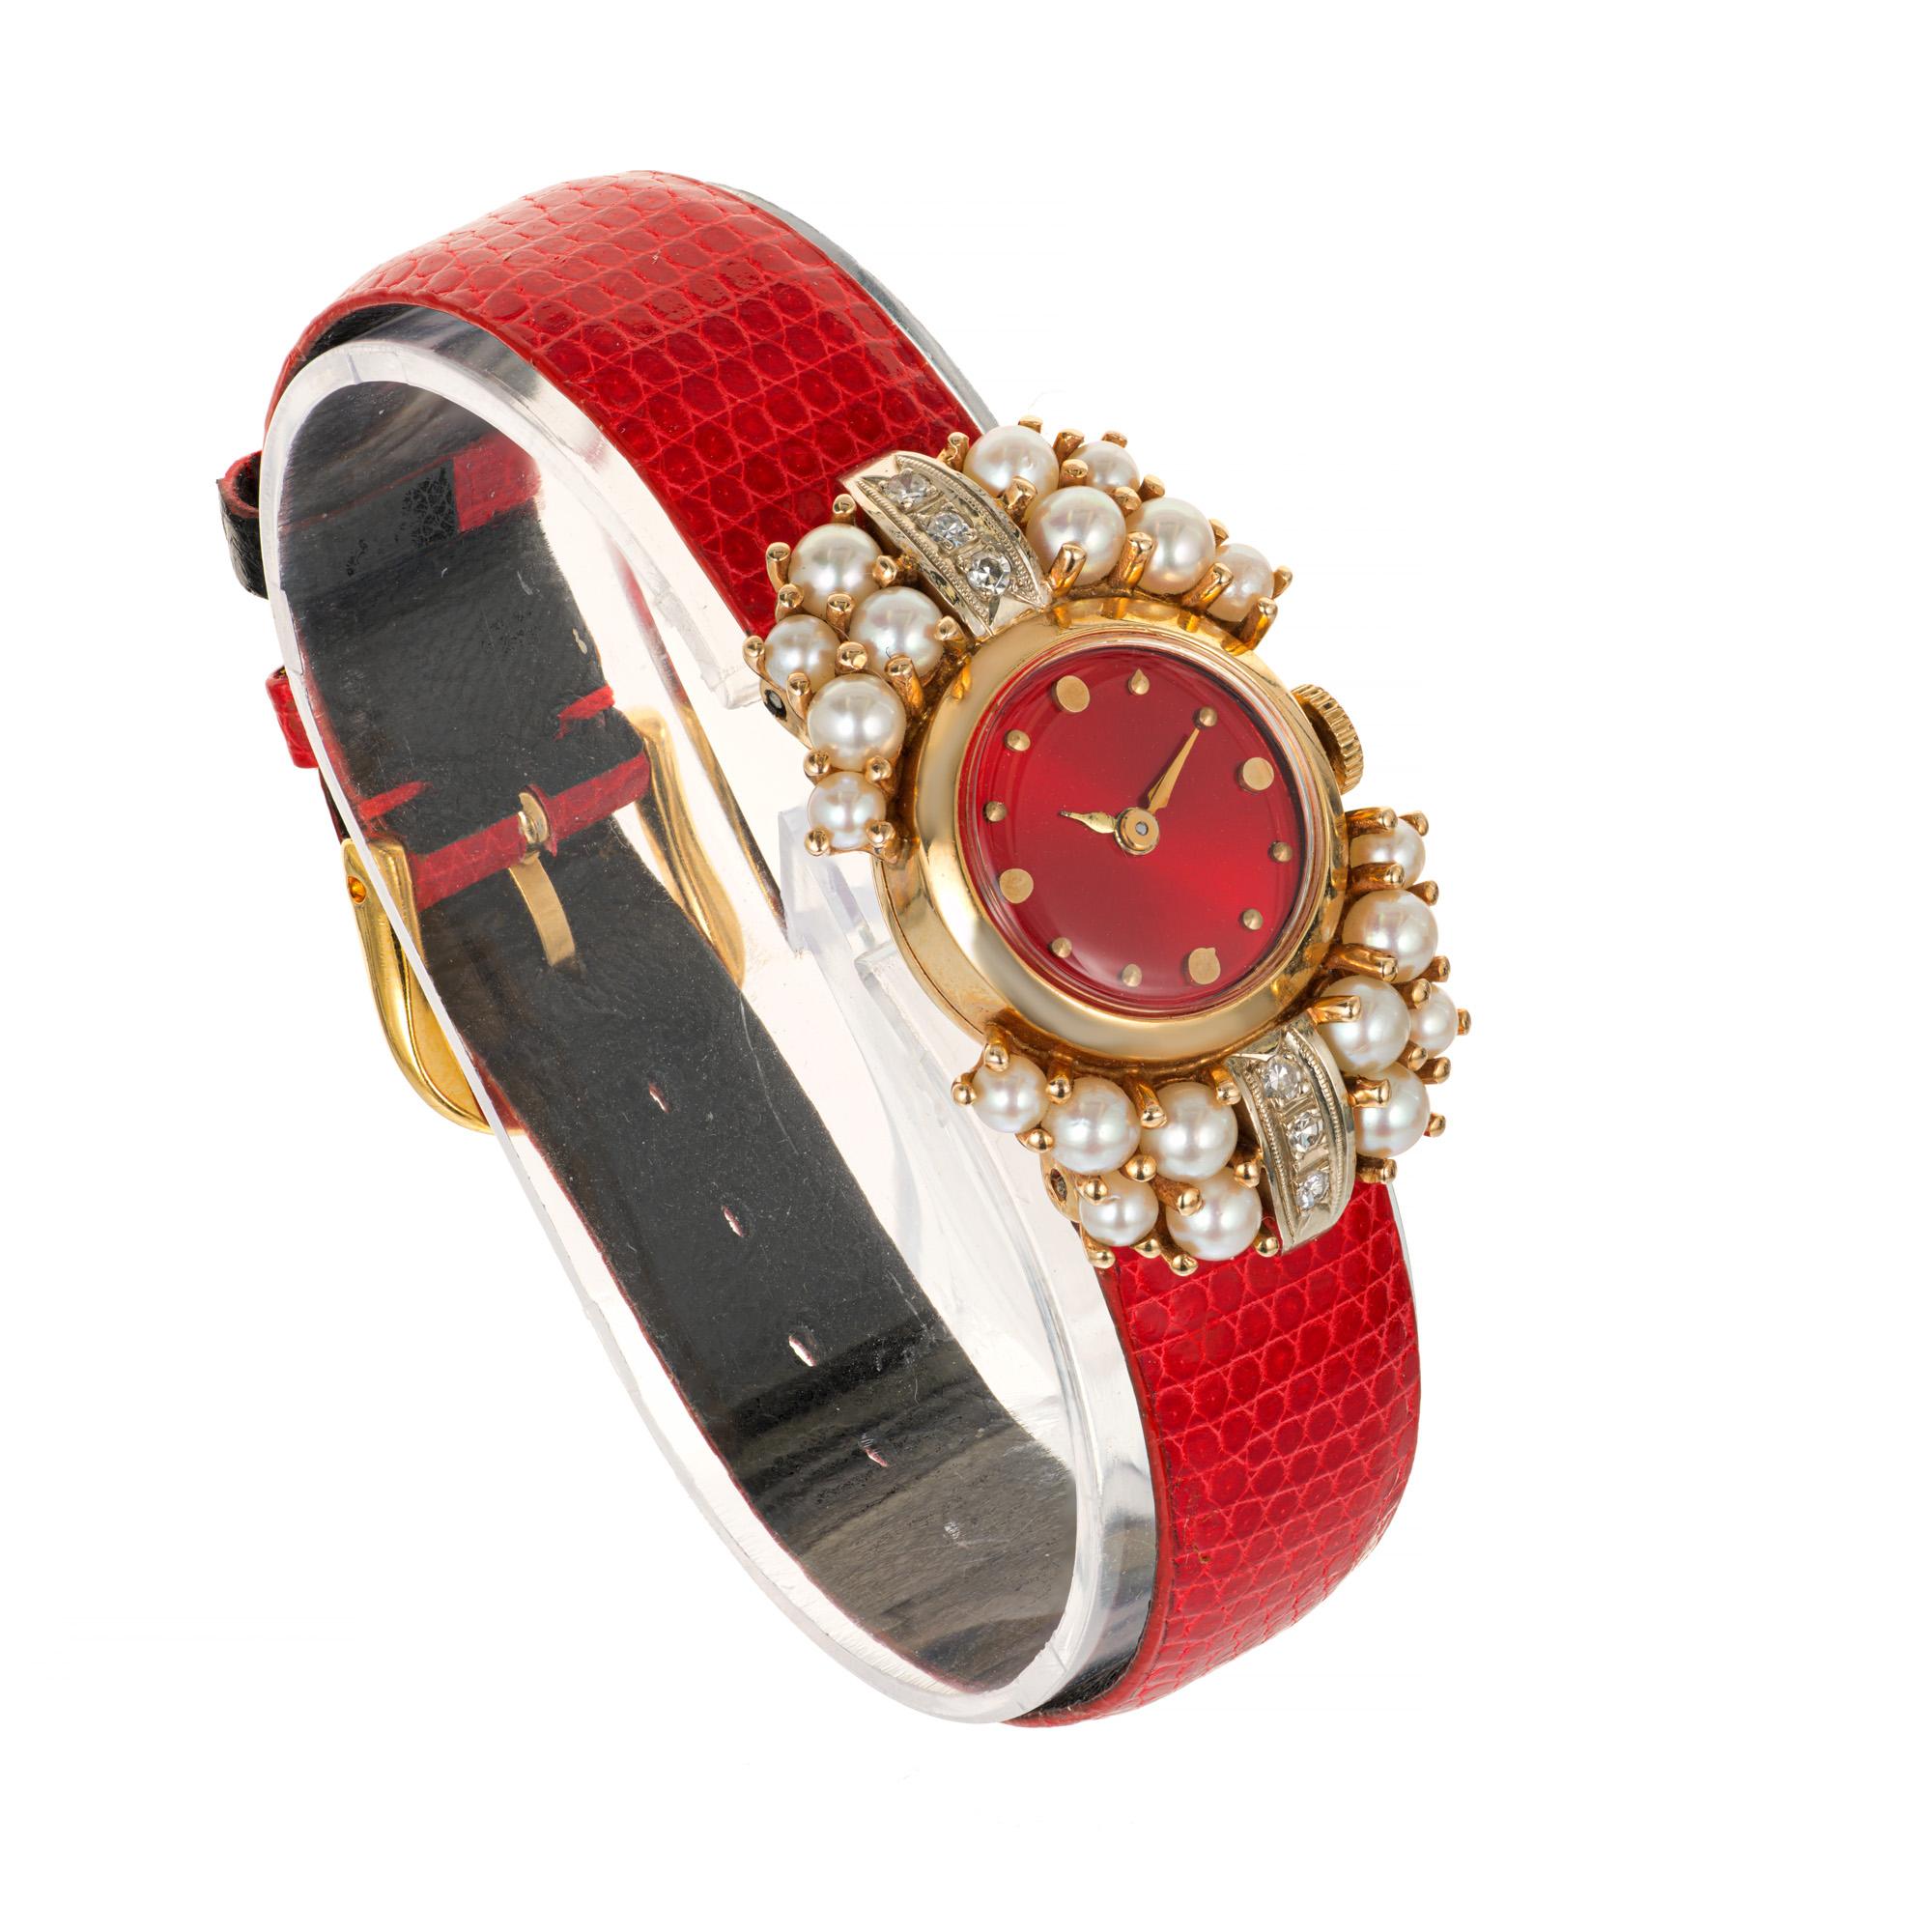 1950's Lady in red wristwatch. Bright, customized red dial by Peter Suchy Jewelers. Manual wind movement. Bright red band.

20 cultured crème color pearls 2.1mm -2.8mm
6 single cut diamonds VS-SI G-H color approx. .12cts 
Length: 34.37mm
Width: